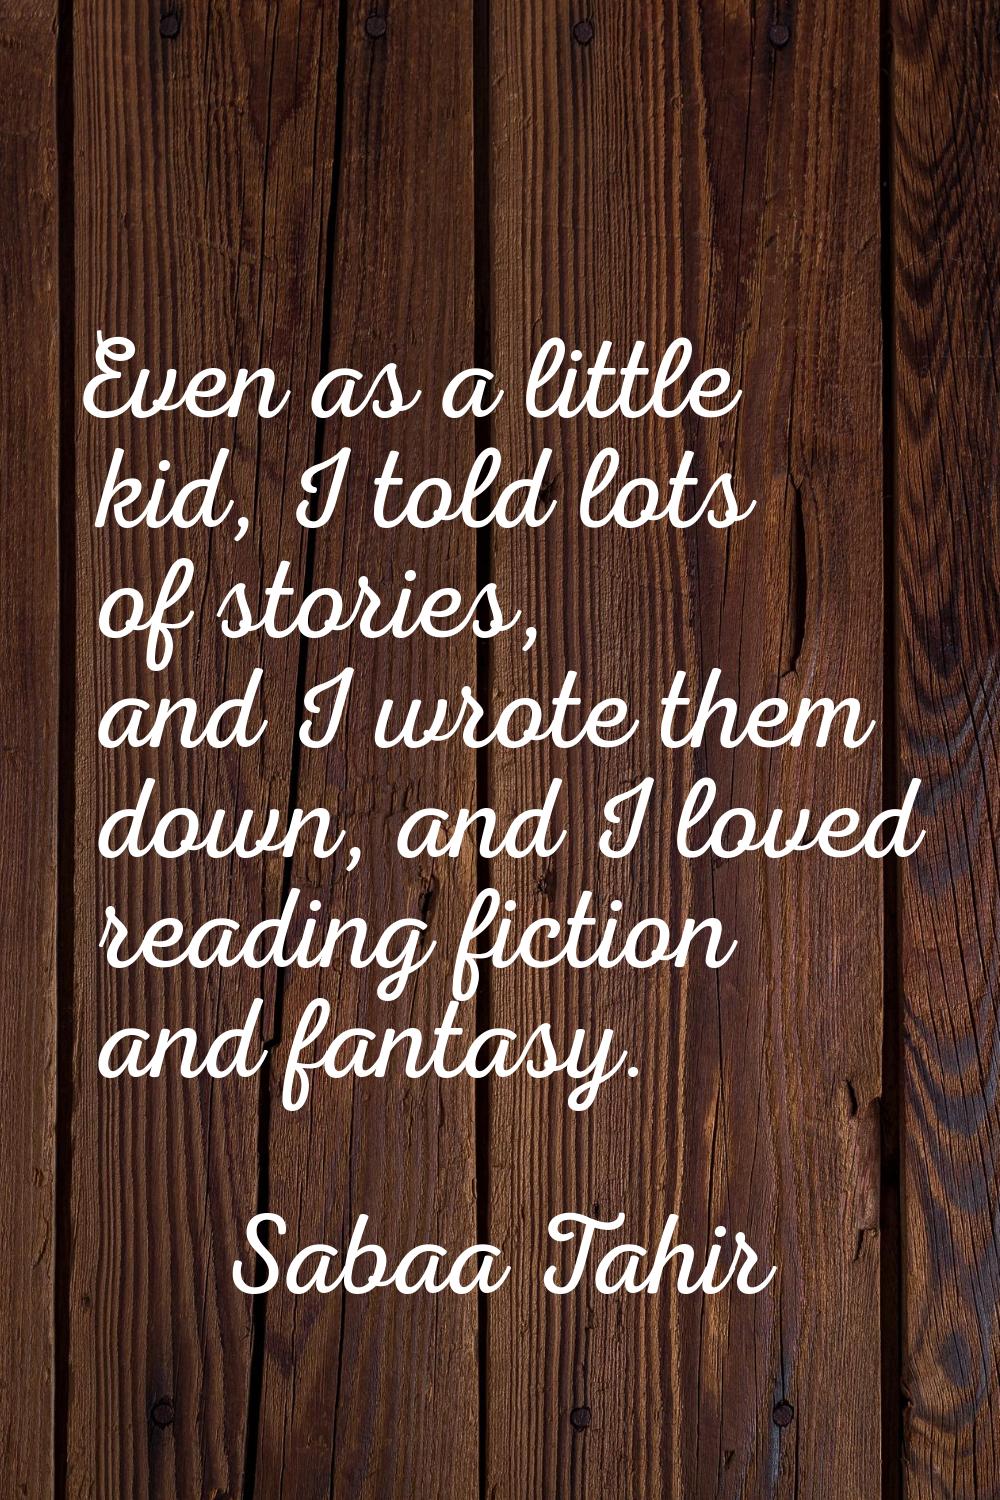 Even as a little kid, I told lots of stories, and I wrote them down, and I loved reading fiction an